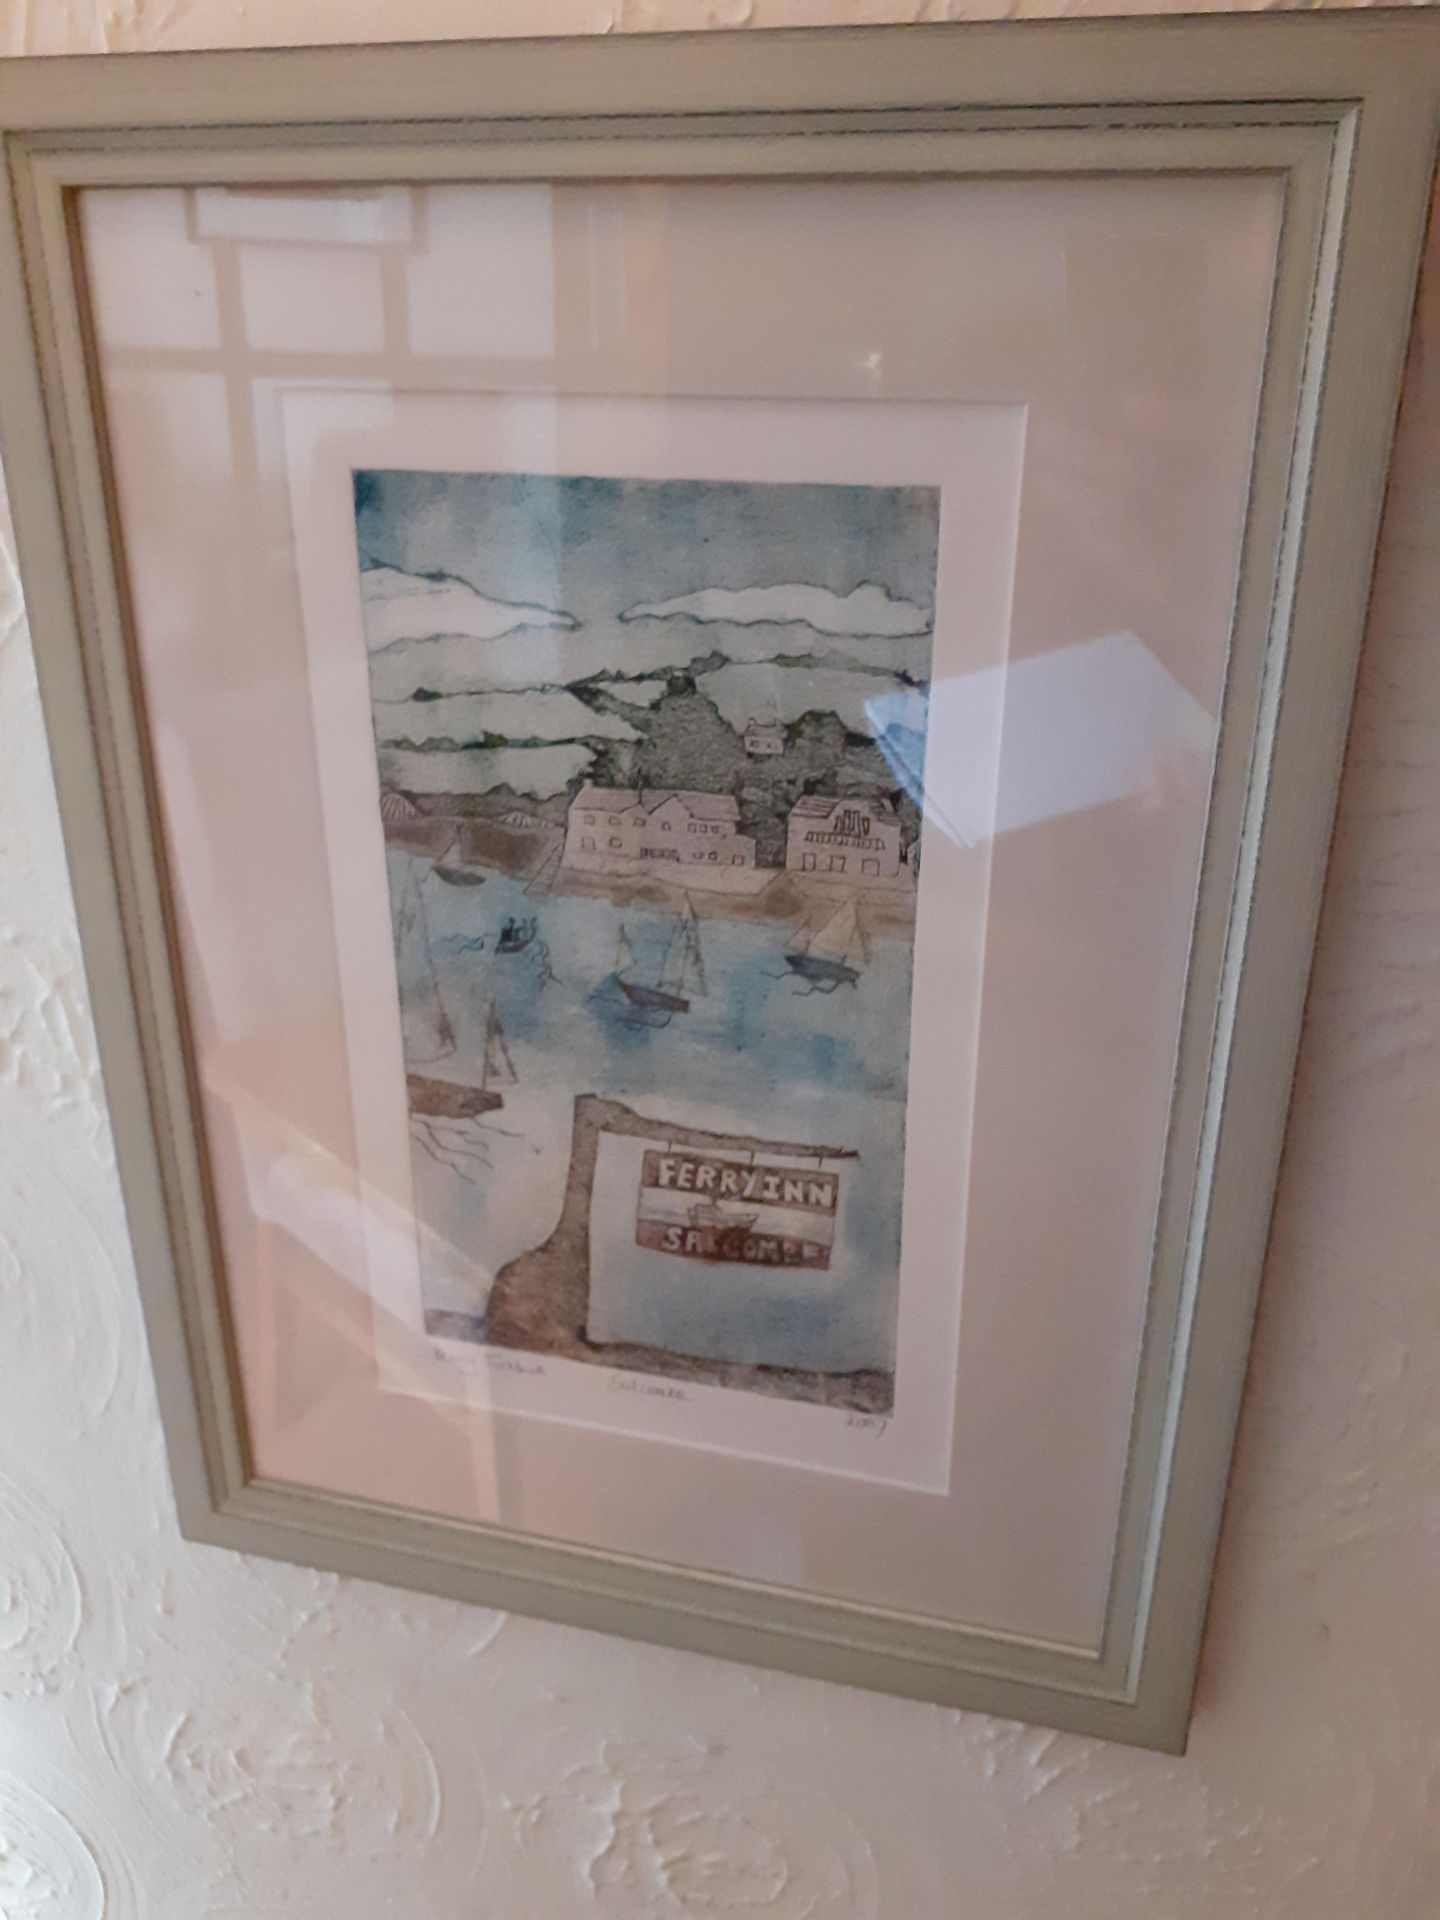 Penny Turnbull 'Salcombe' framed print, Filim Ejan 'landscape' painting and limited edition Bryan Il